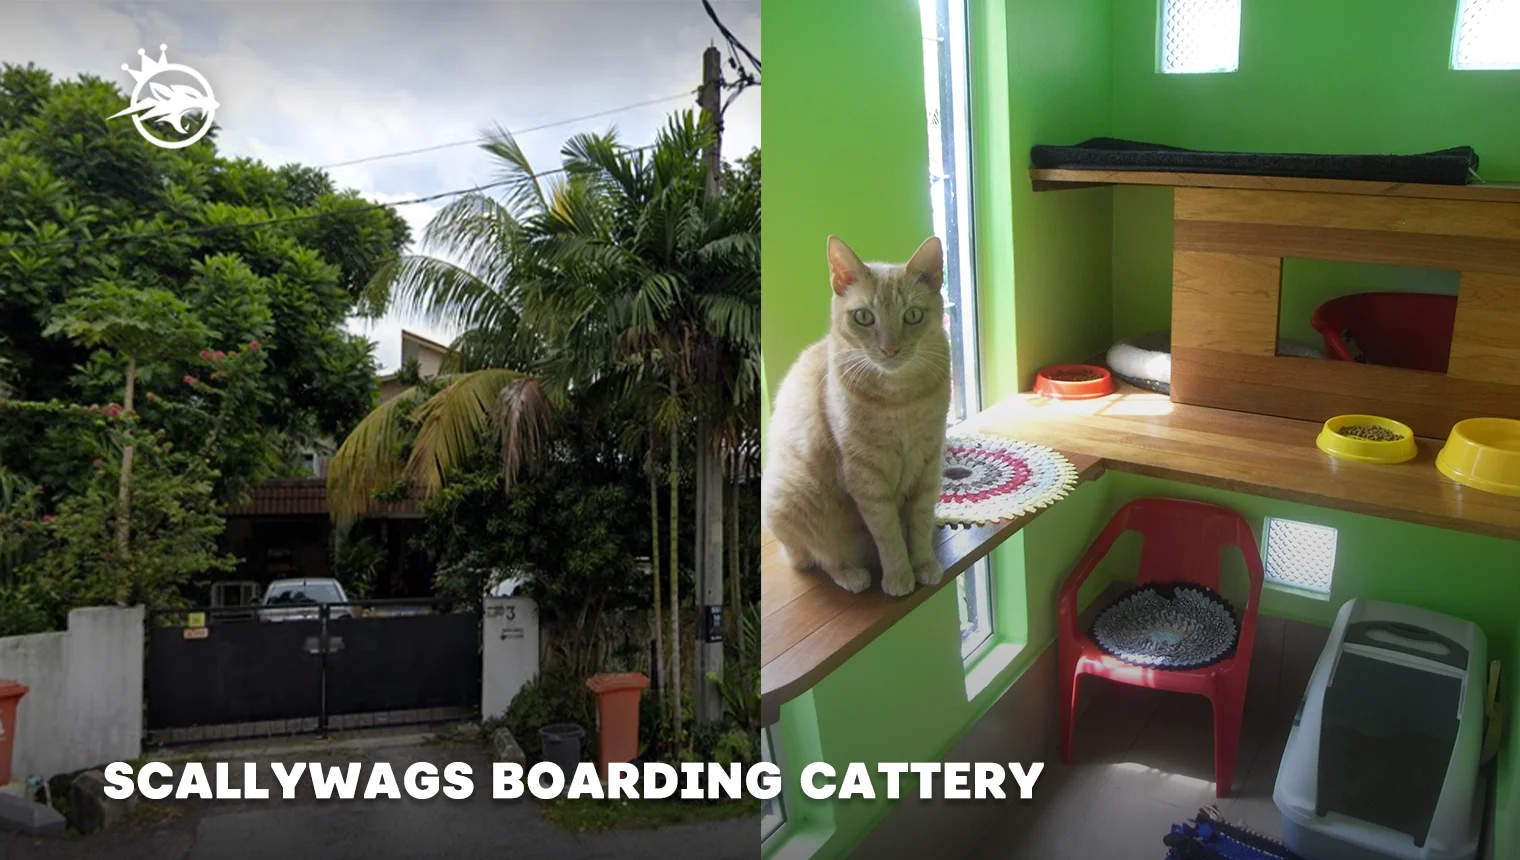 scallywags boarding cattery